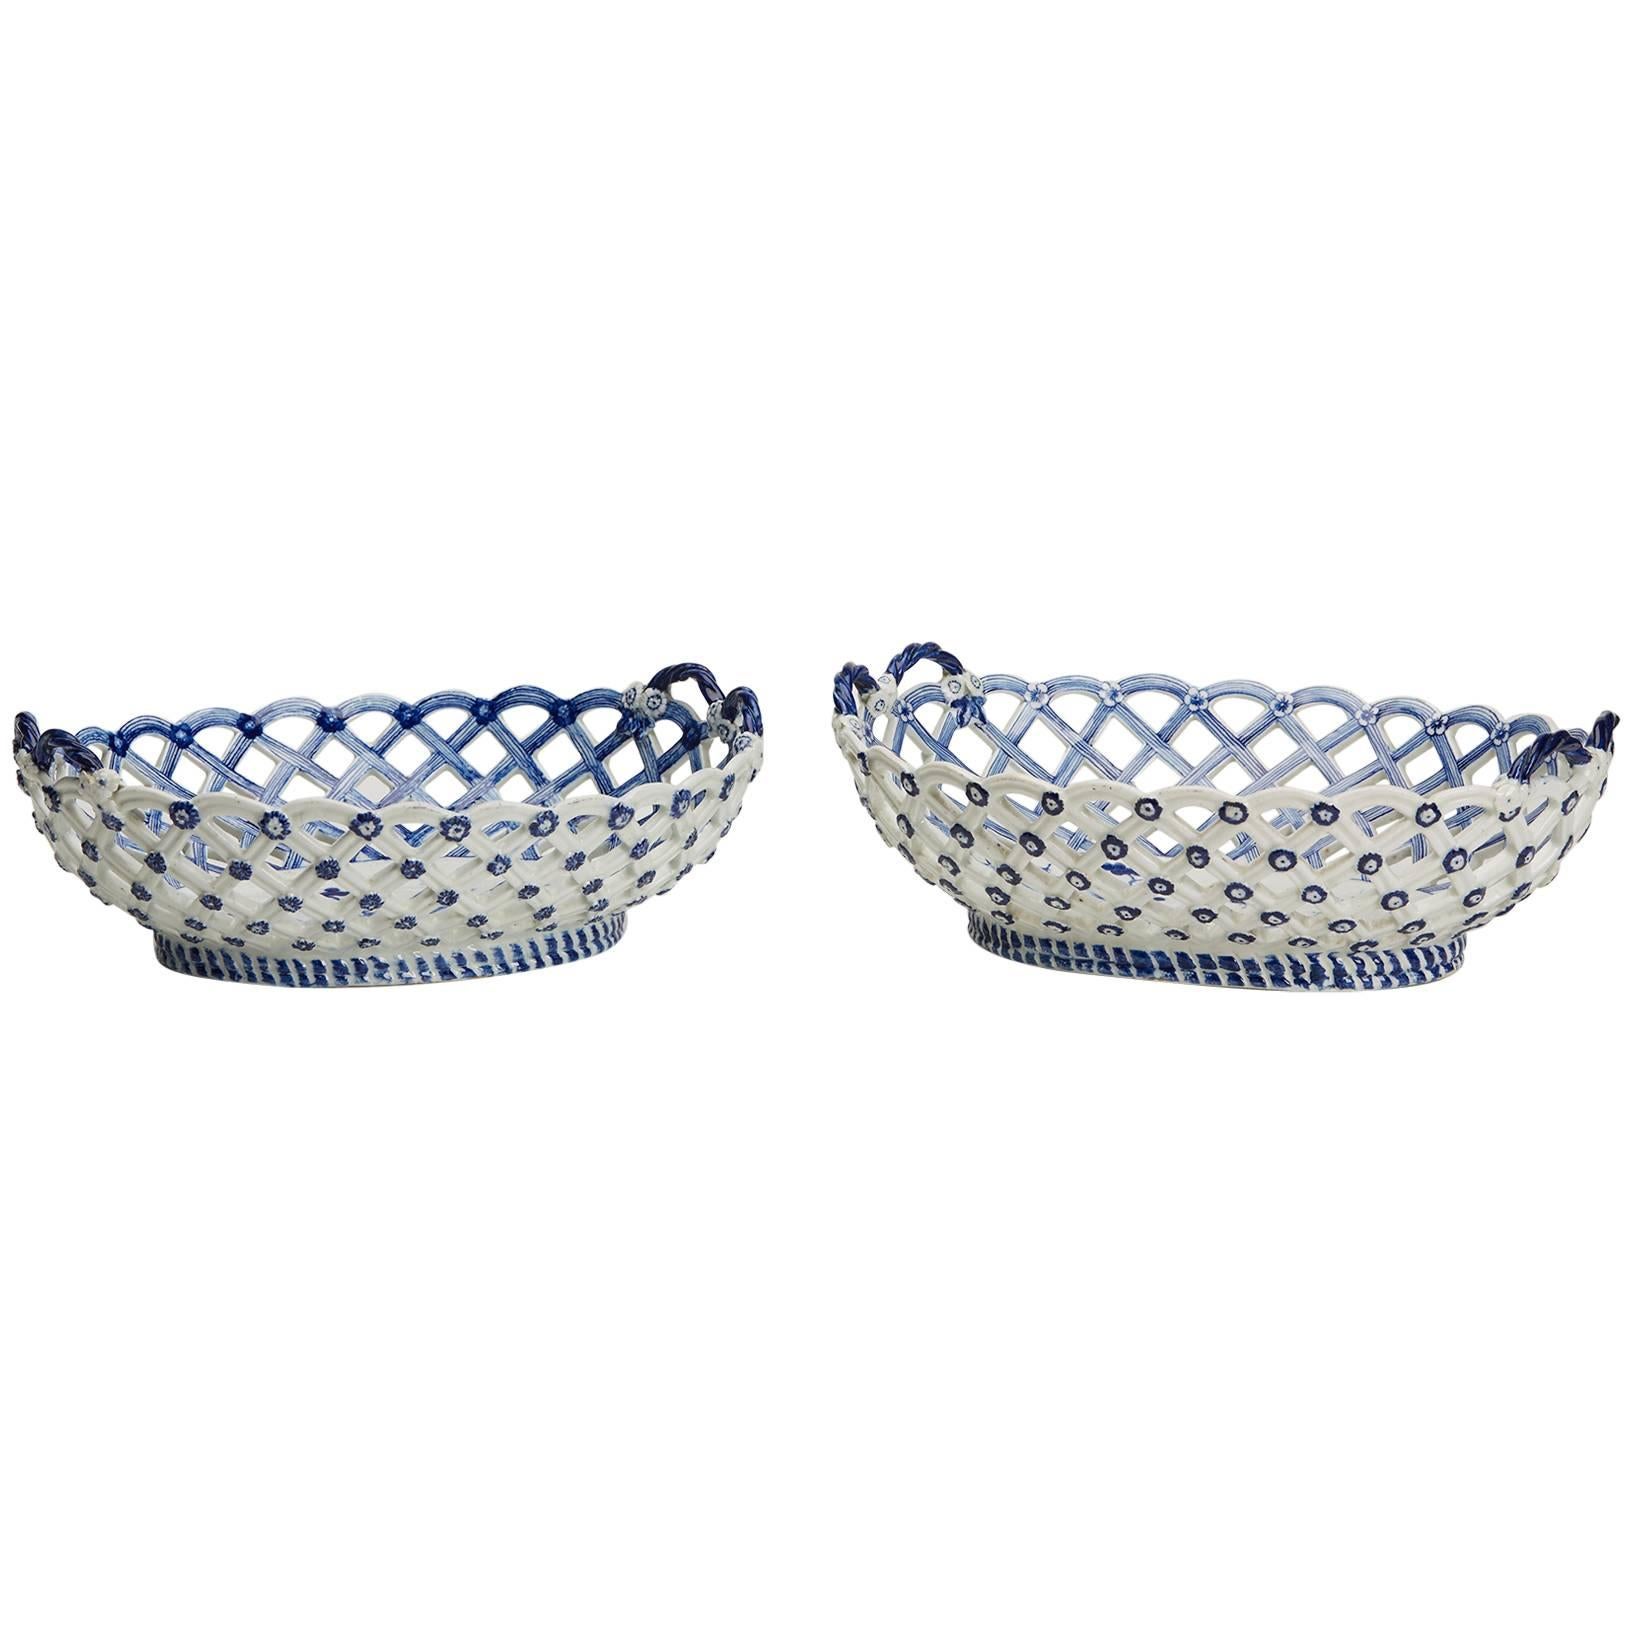 Pair of Antique Derby Reticulated Chinoiserie Baskets, circa 1760